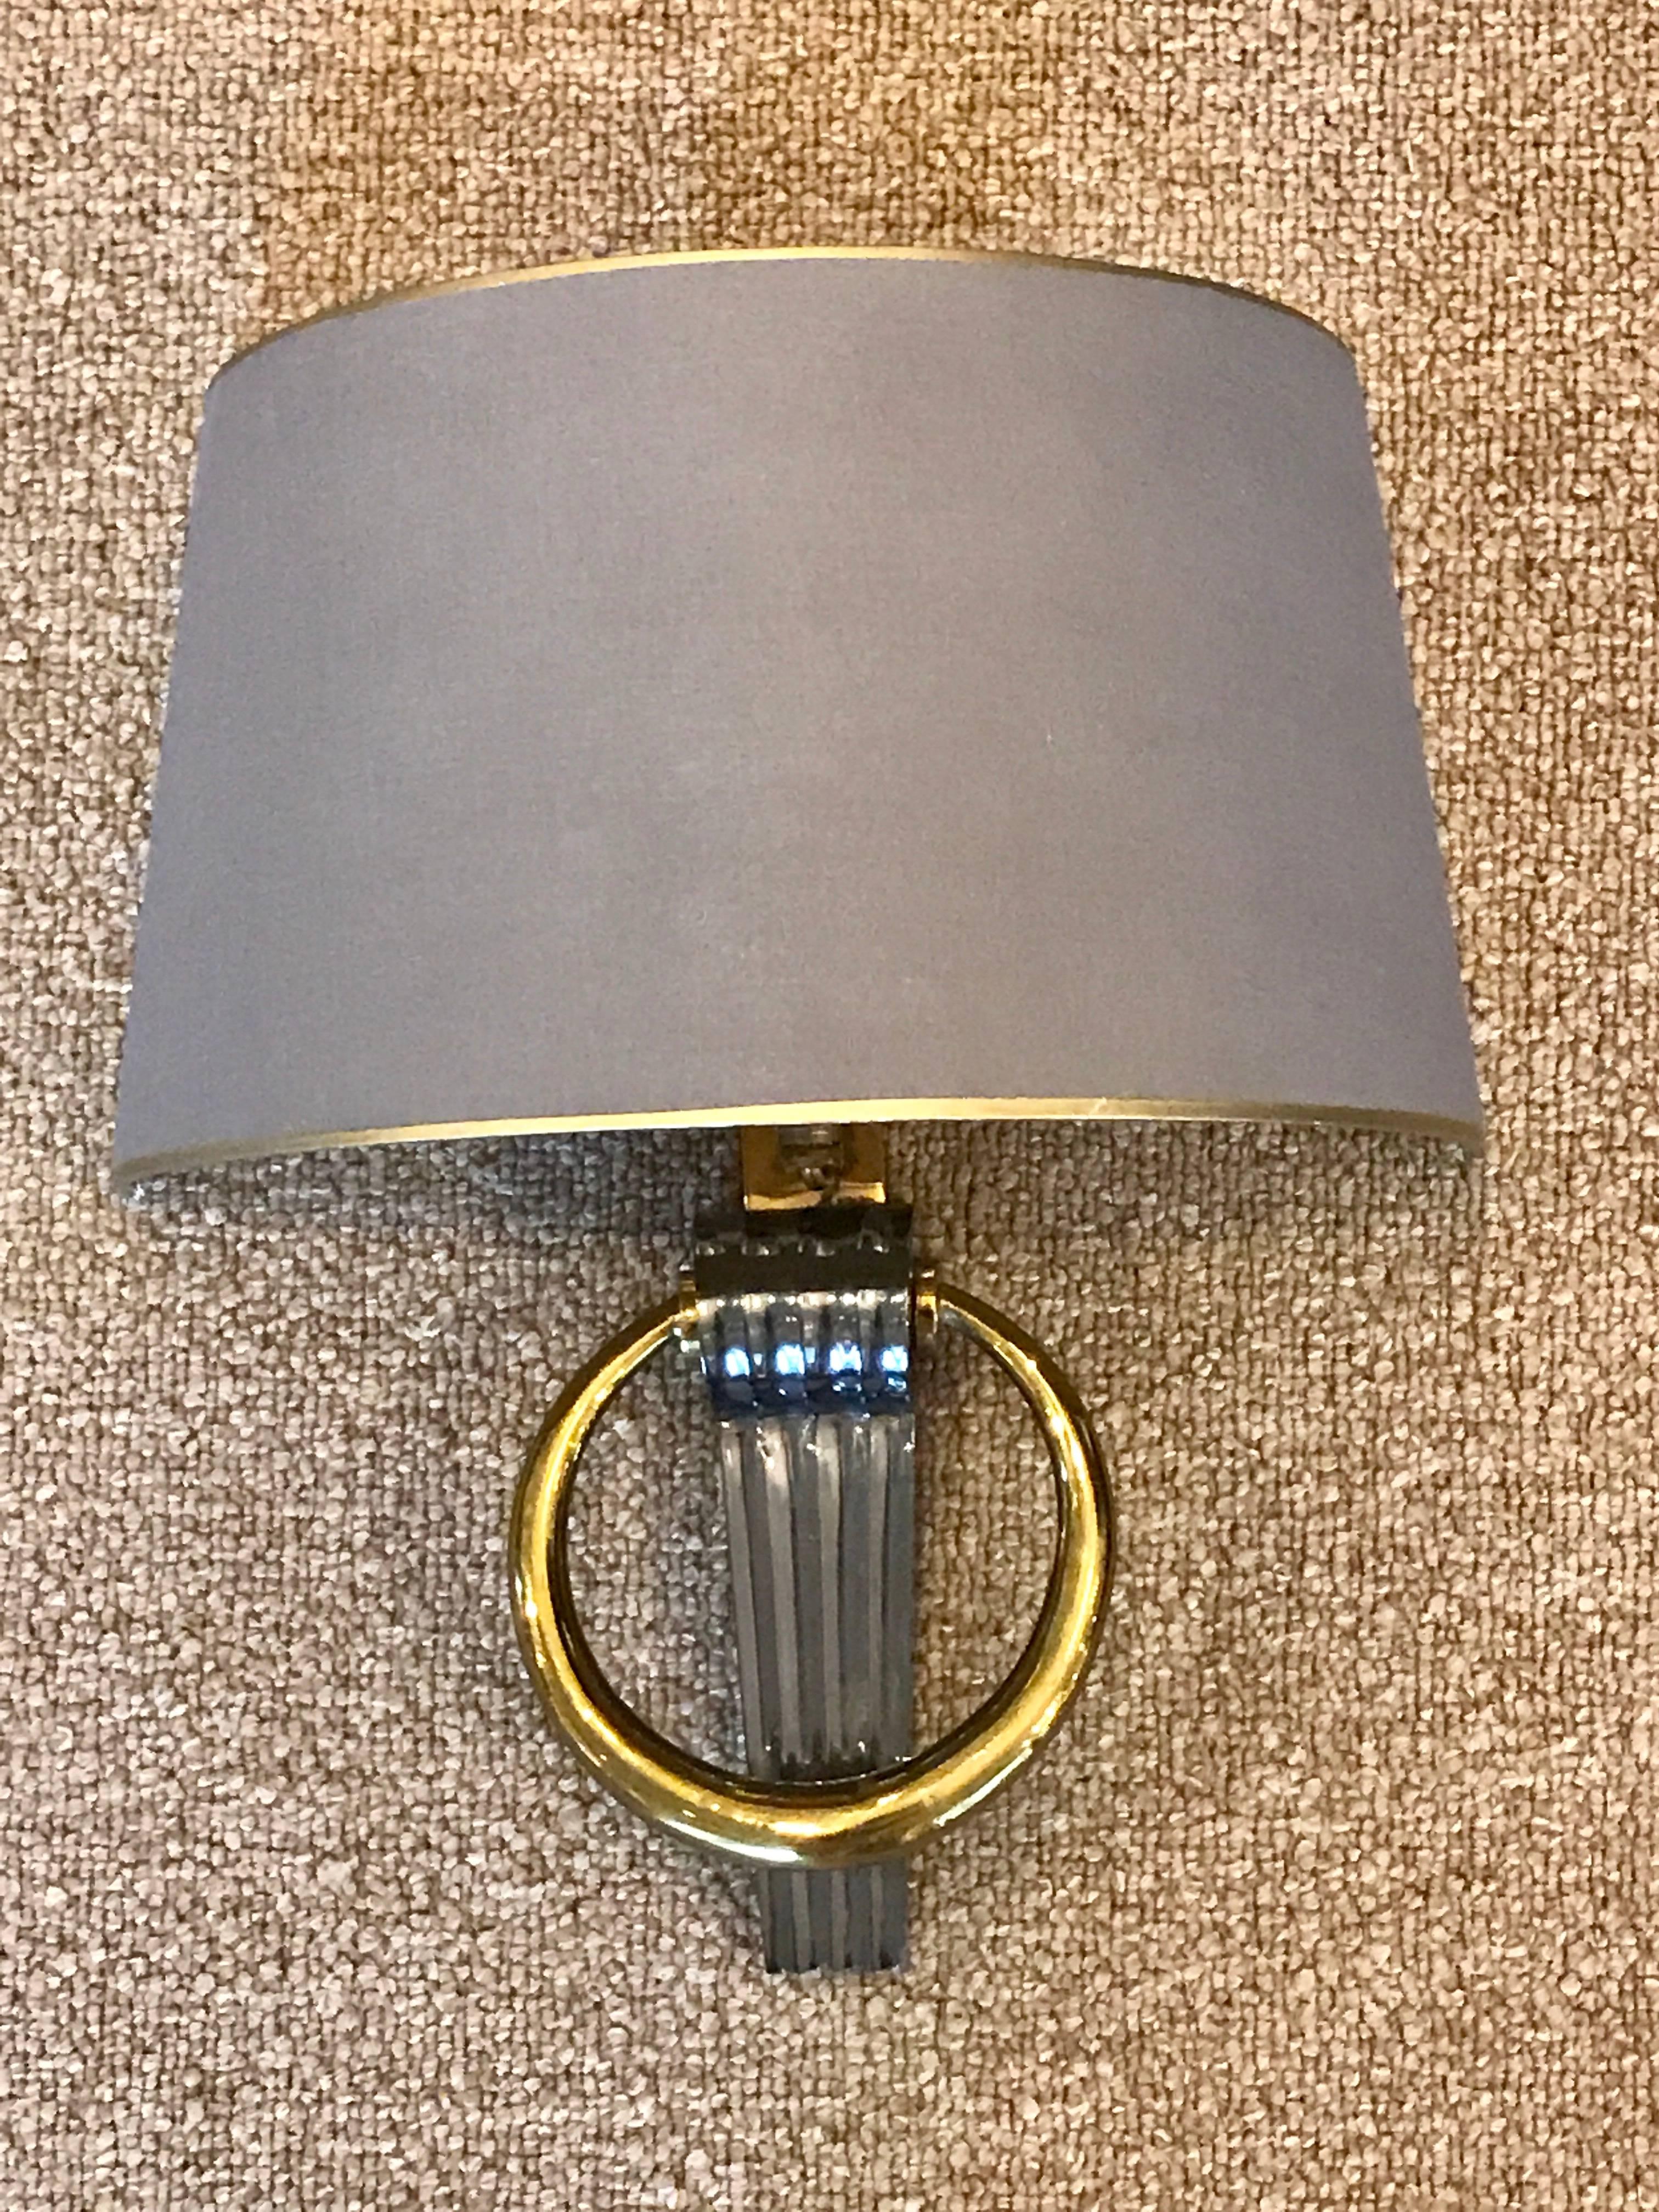 Exquisite pair of Maison Jansen neoclassical wall lights, each one fitted with custom demilune shades, supported on a single reeded gun metal column with one large brass ring. The shades measure 6